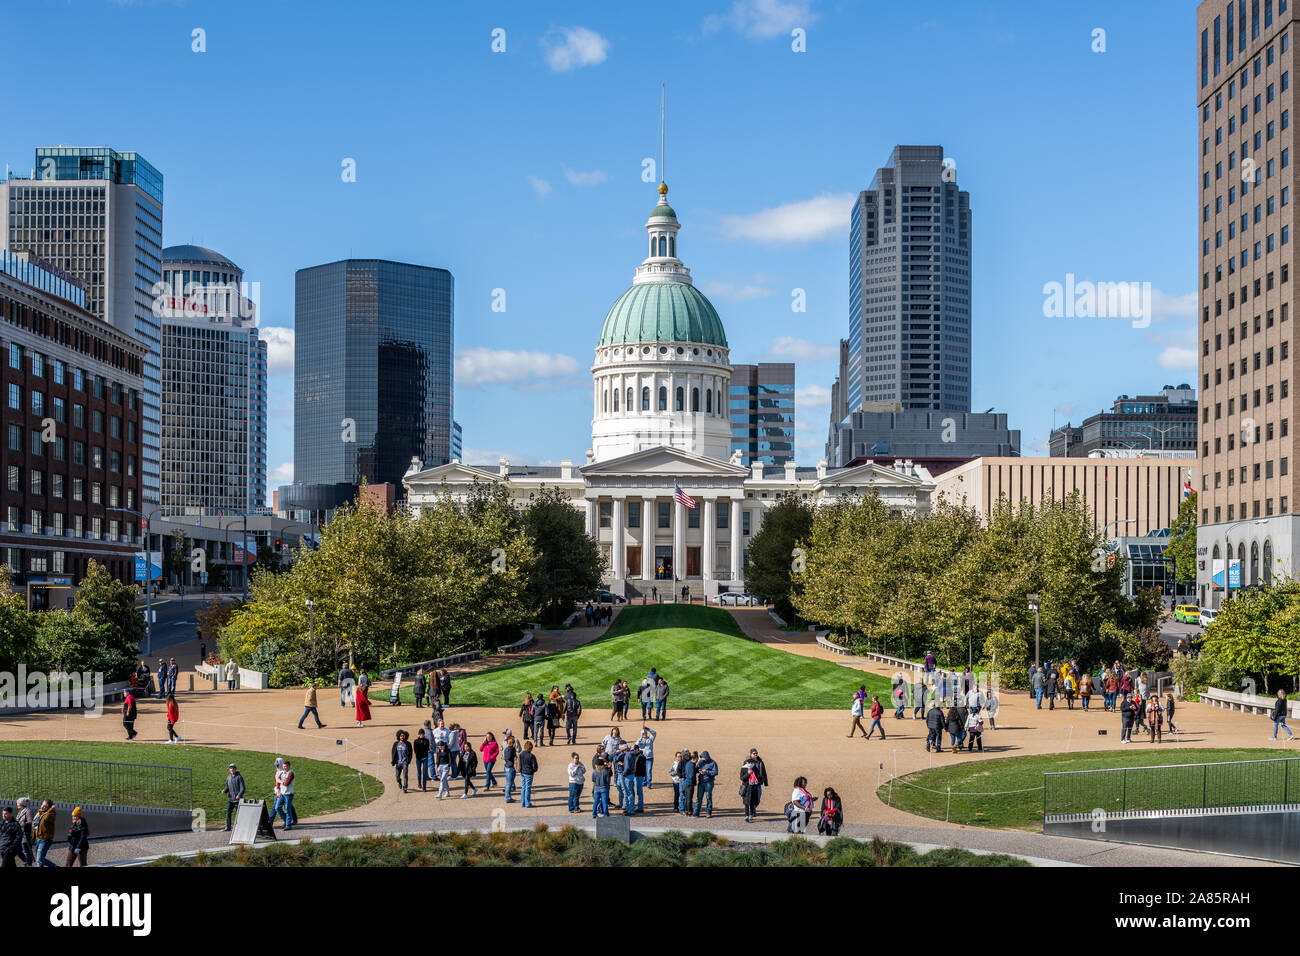 Old courthouse in downtown St. Louis Stock Photo